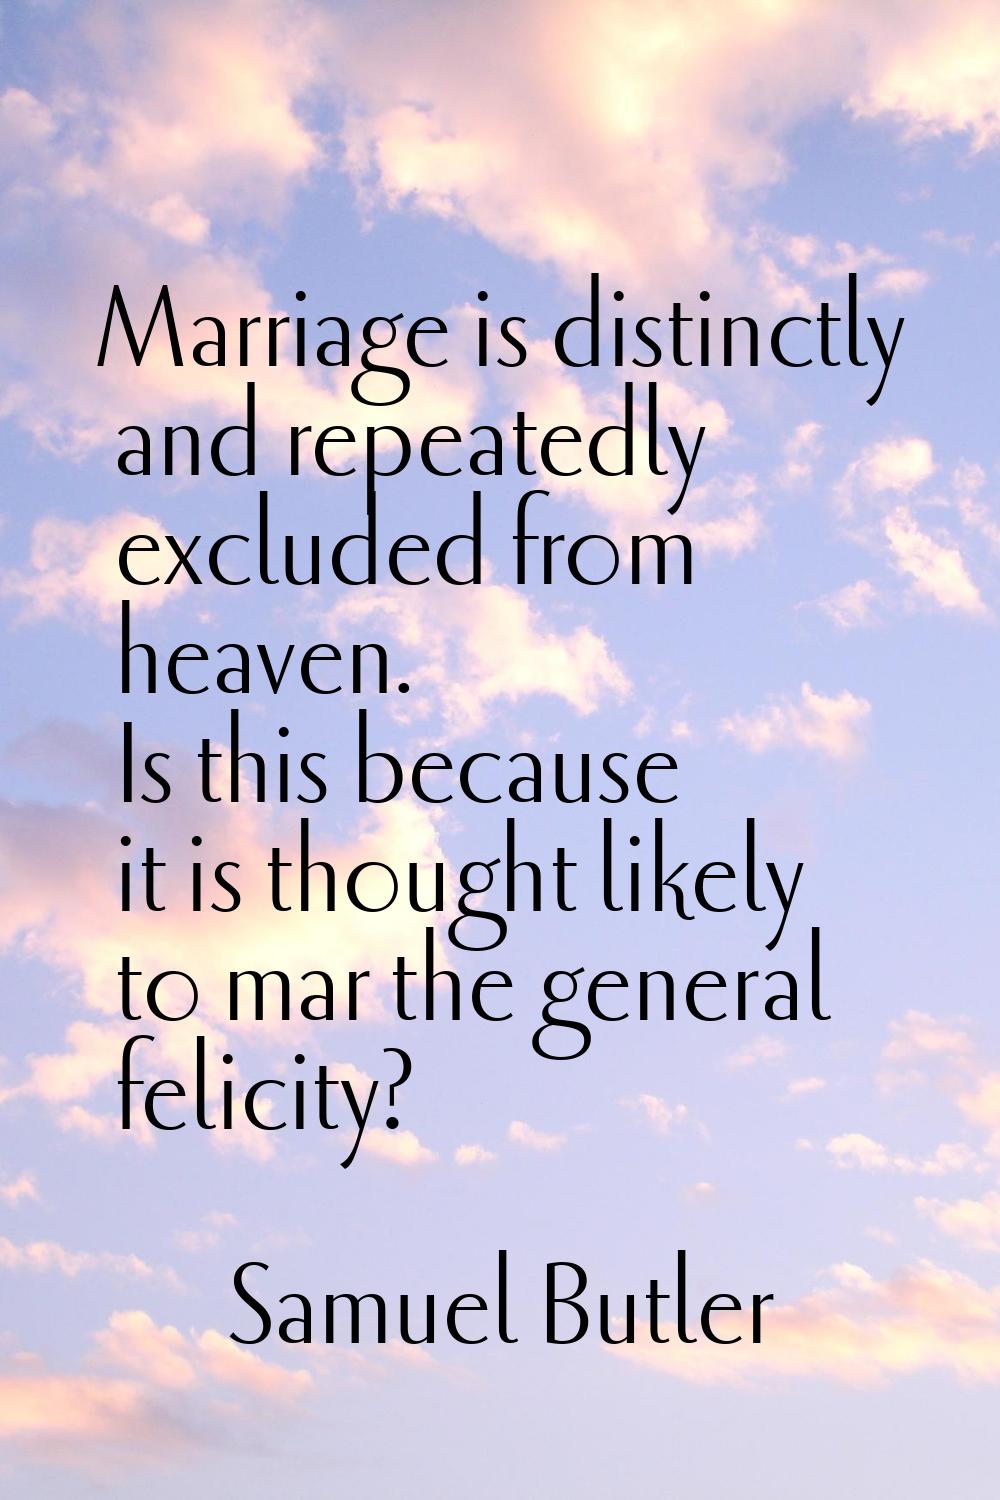 Marriage is distinctly and repeatedly excluded from heaven. Is this because it is thought likely to